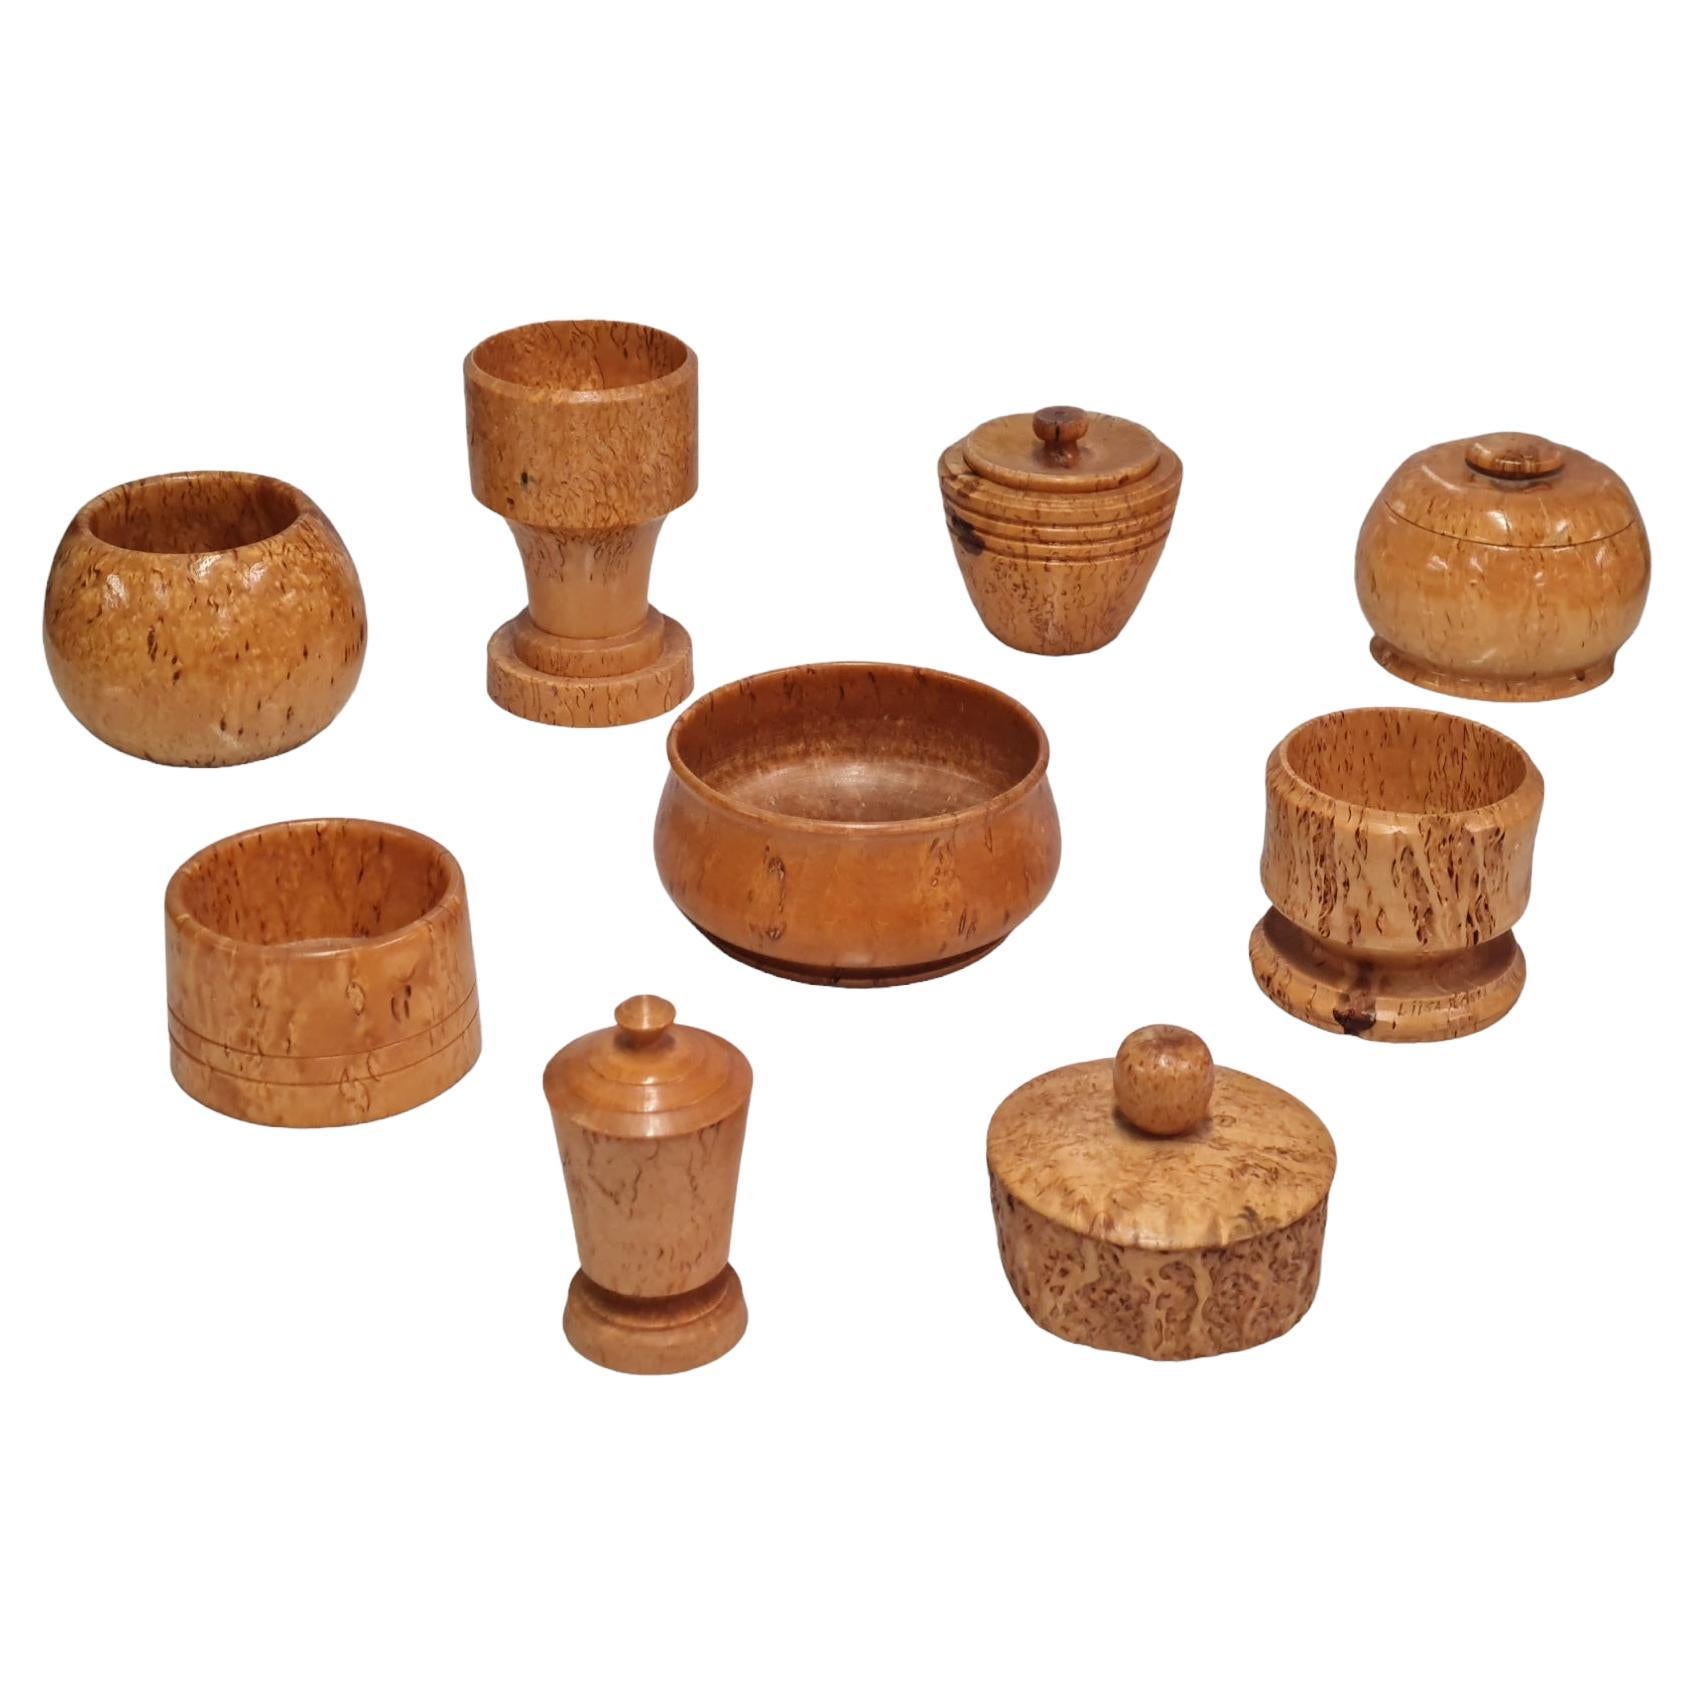 A Beautiful Set of 9 Unique Curly Birch Cases and Bowls 